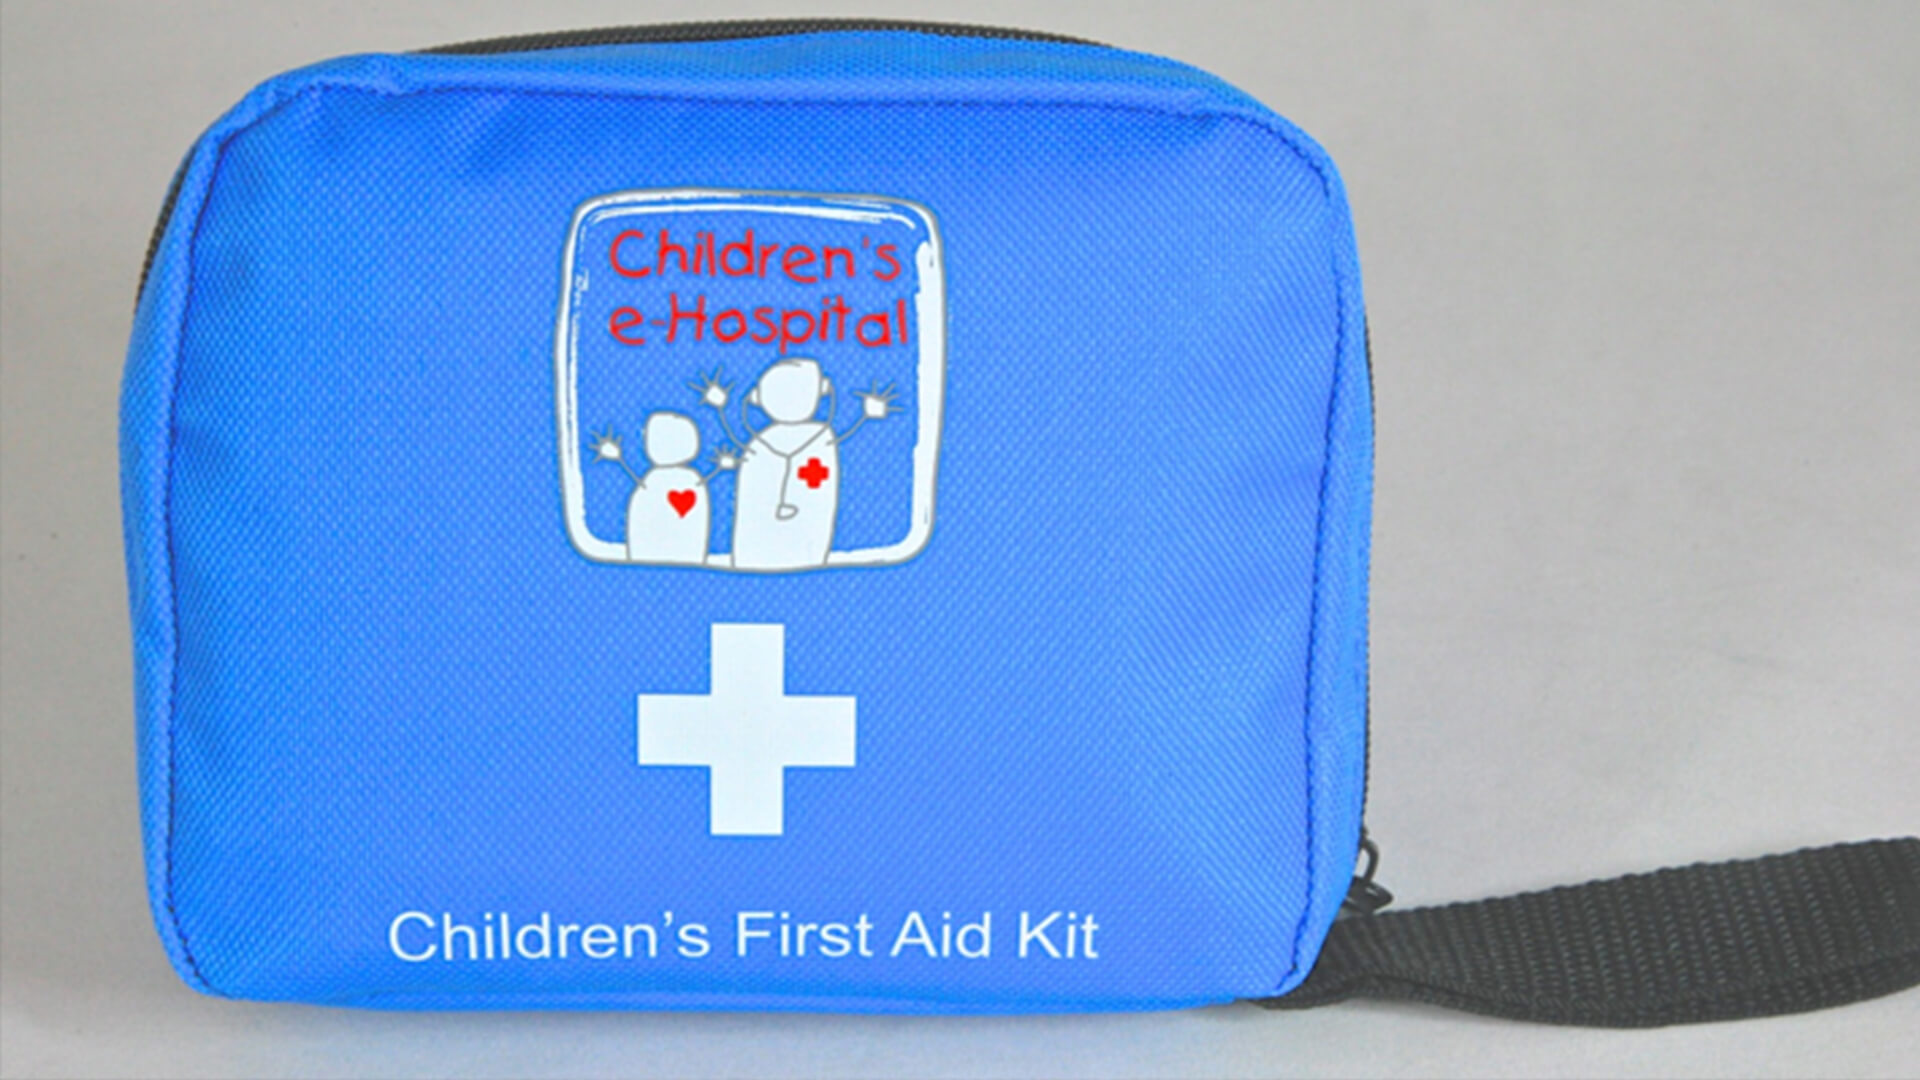 The Children’s e-Hospital launches paediatric first aid kit